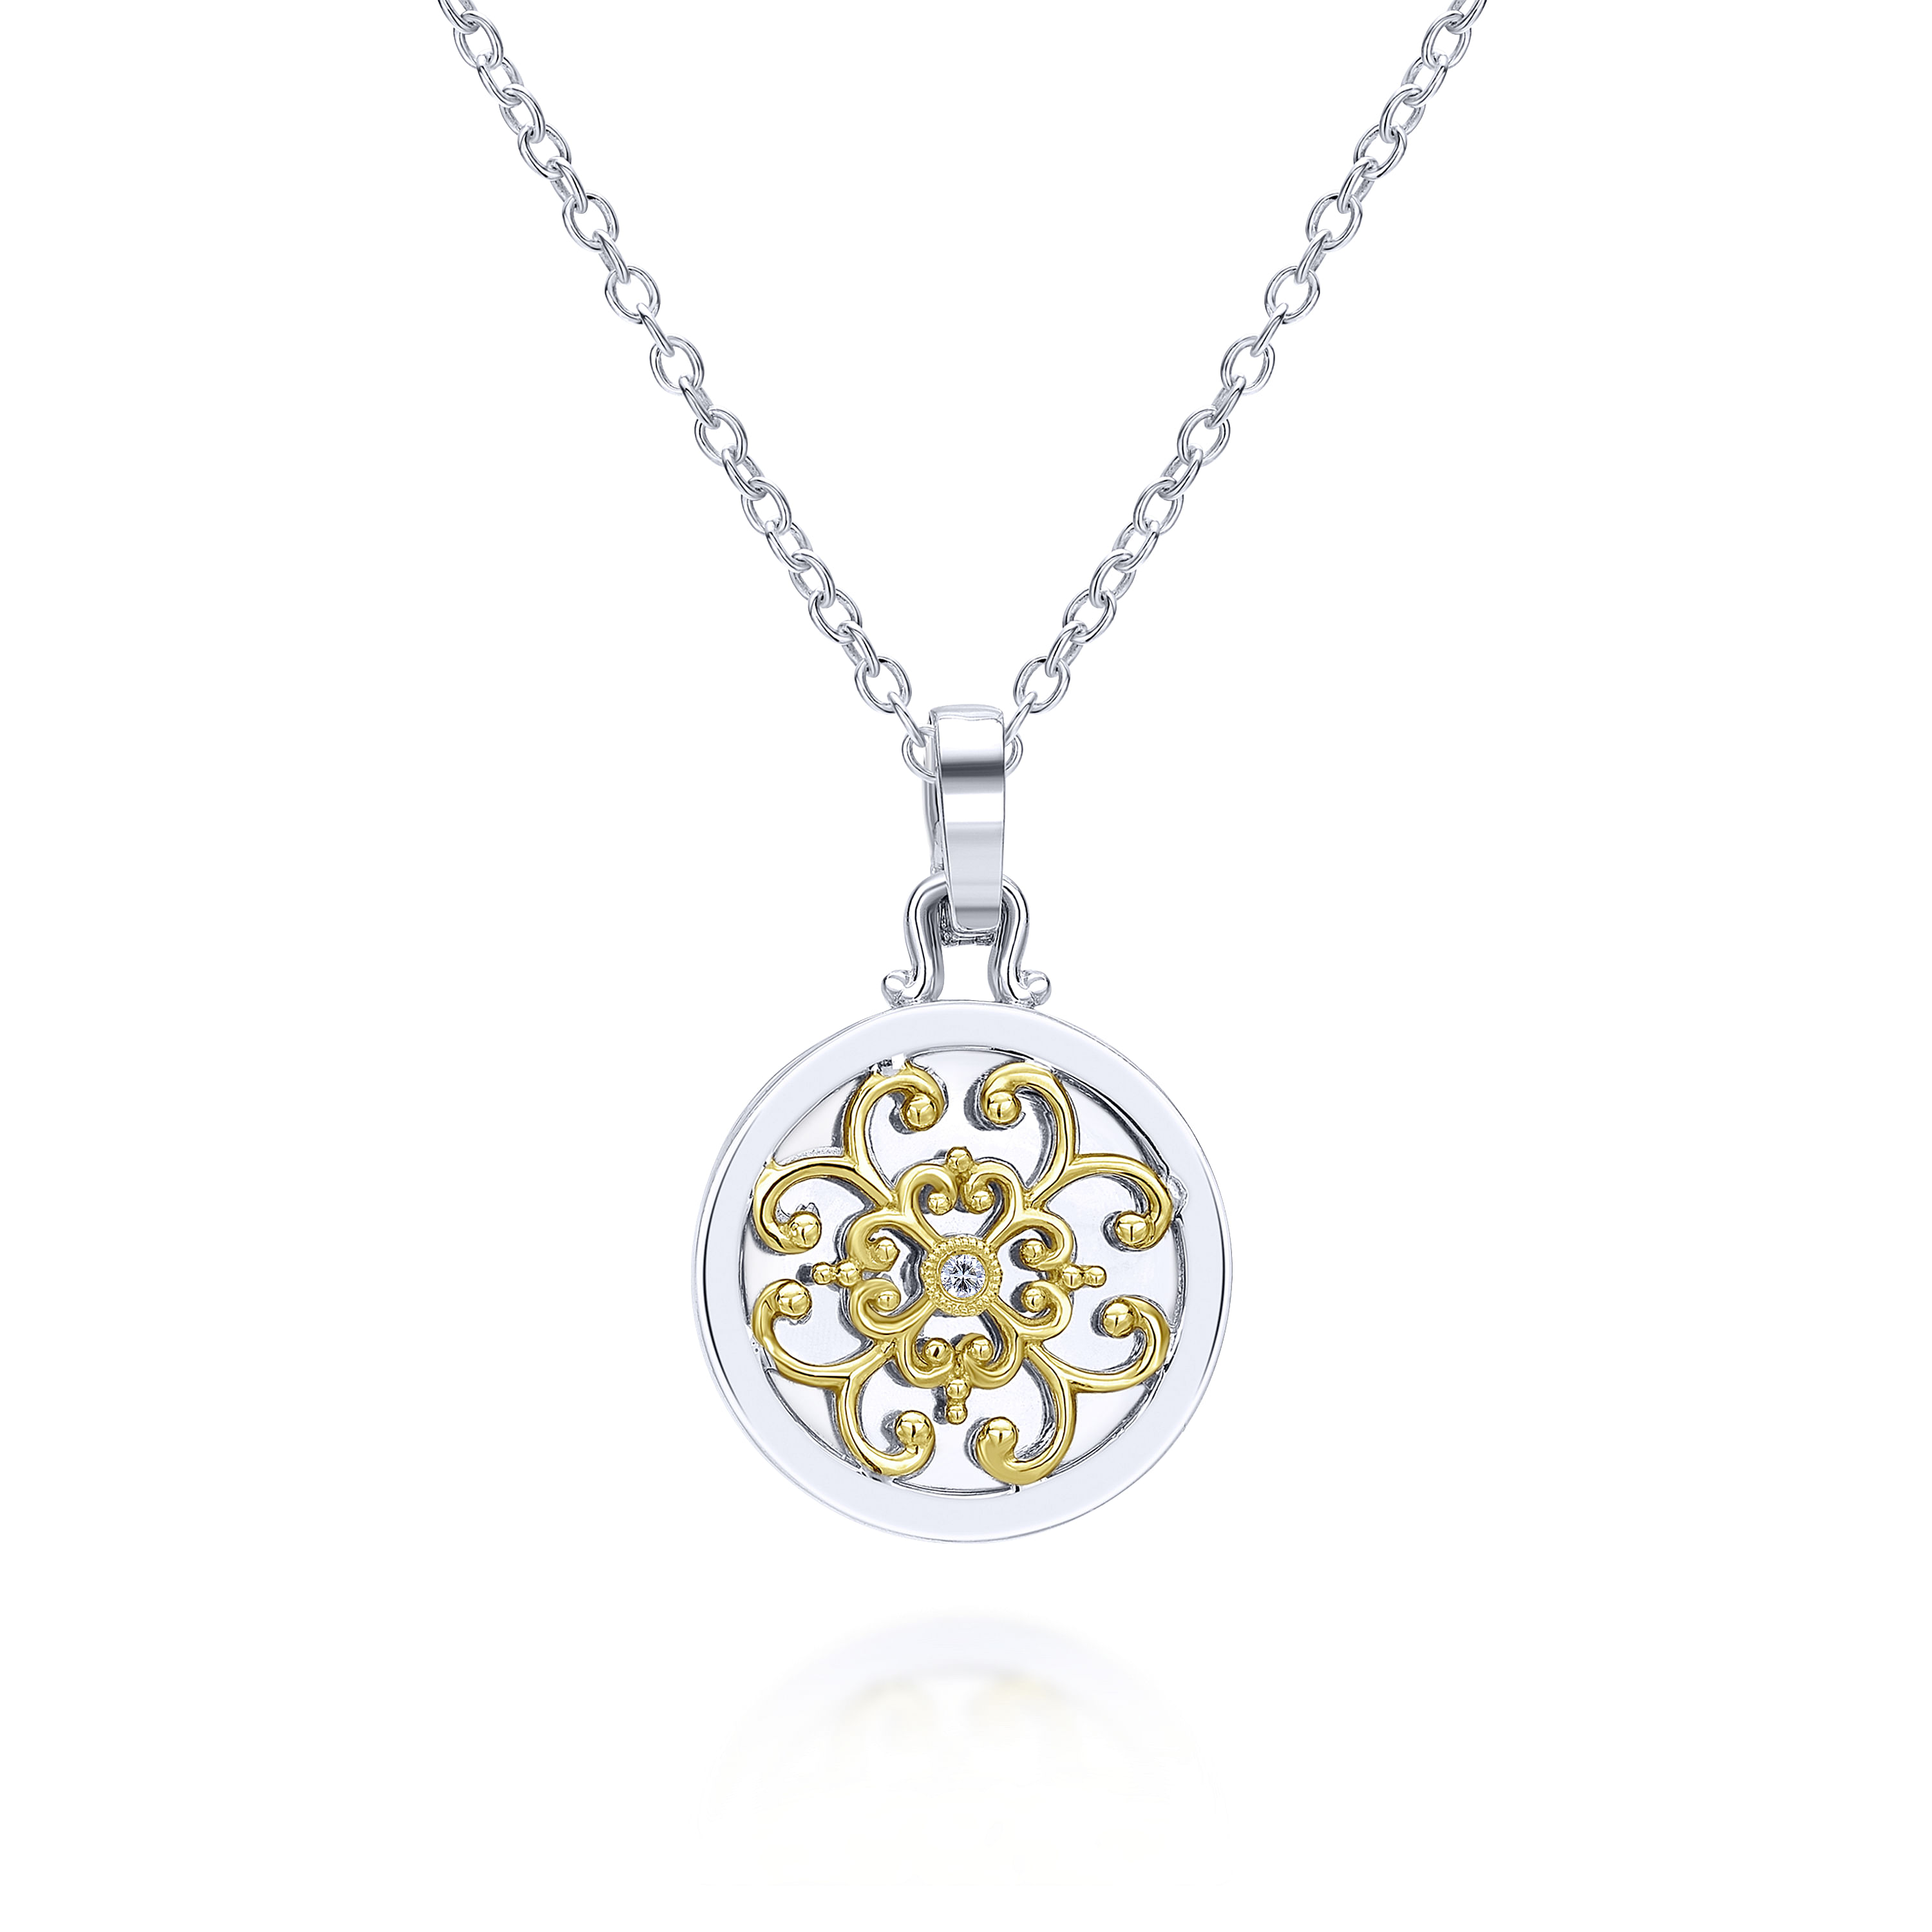 18 inch 925 Sterling Silver 18K Yellow Gold Round Filigree Diamond Pendant Necklace